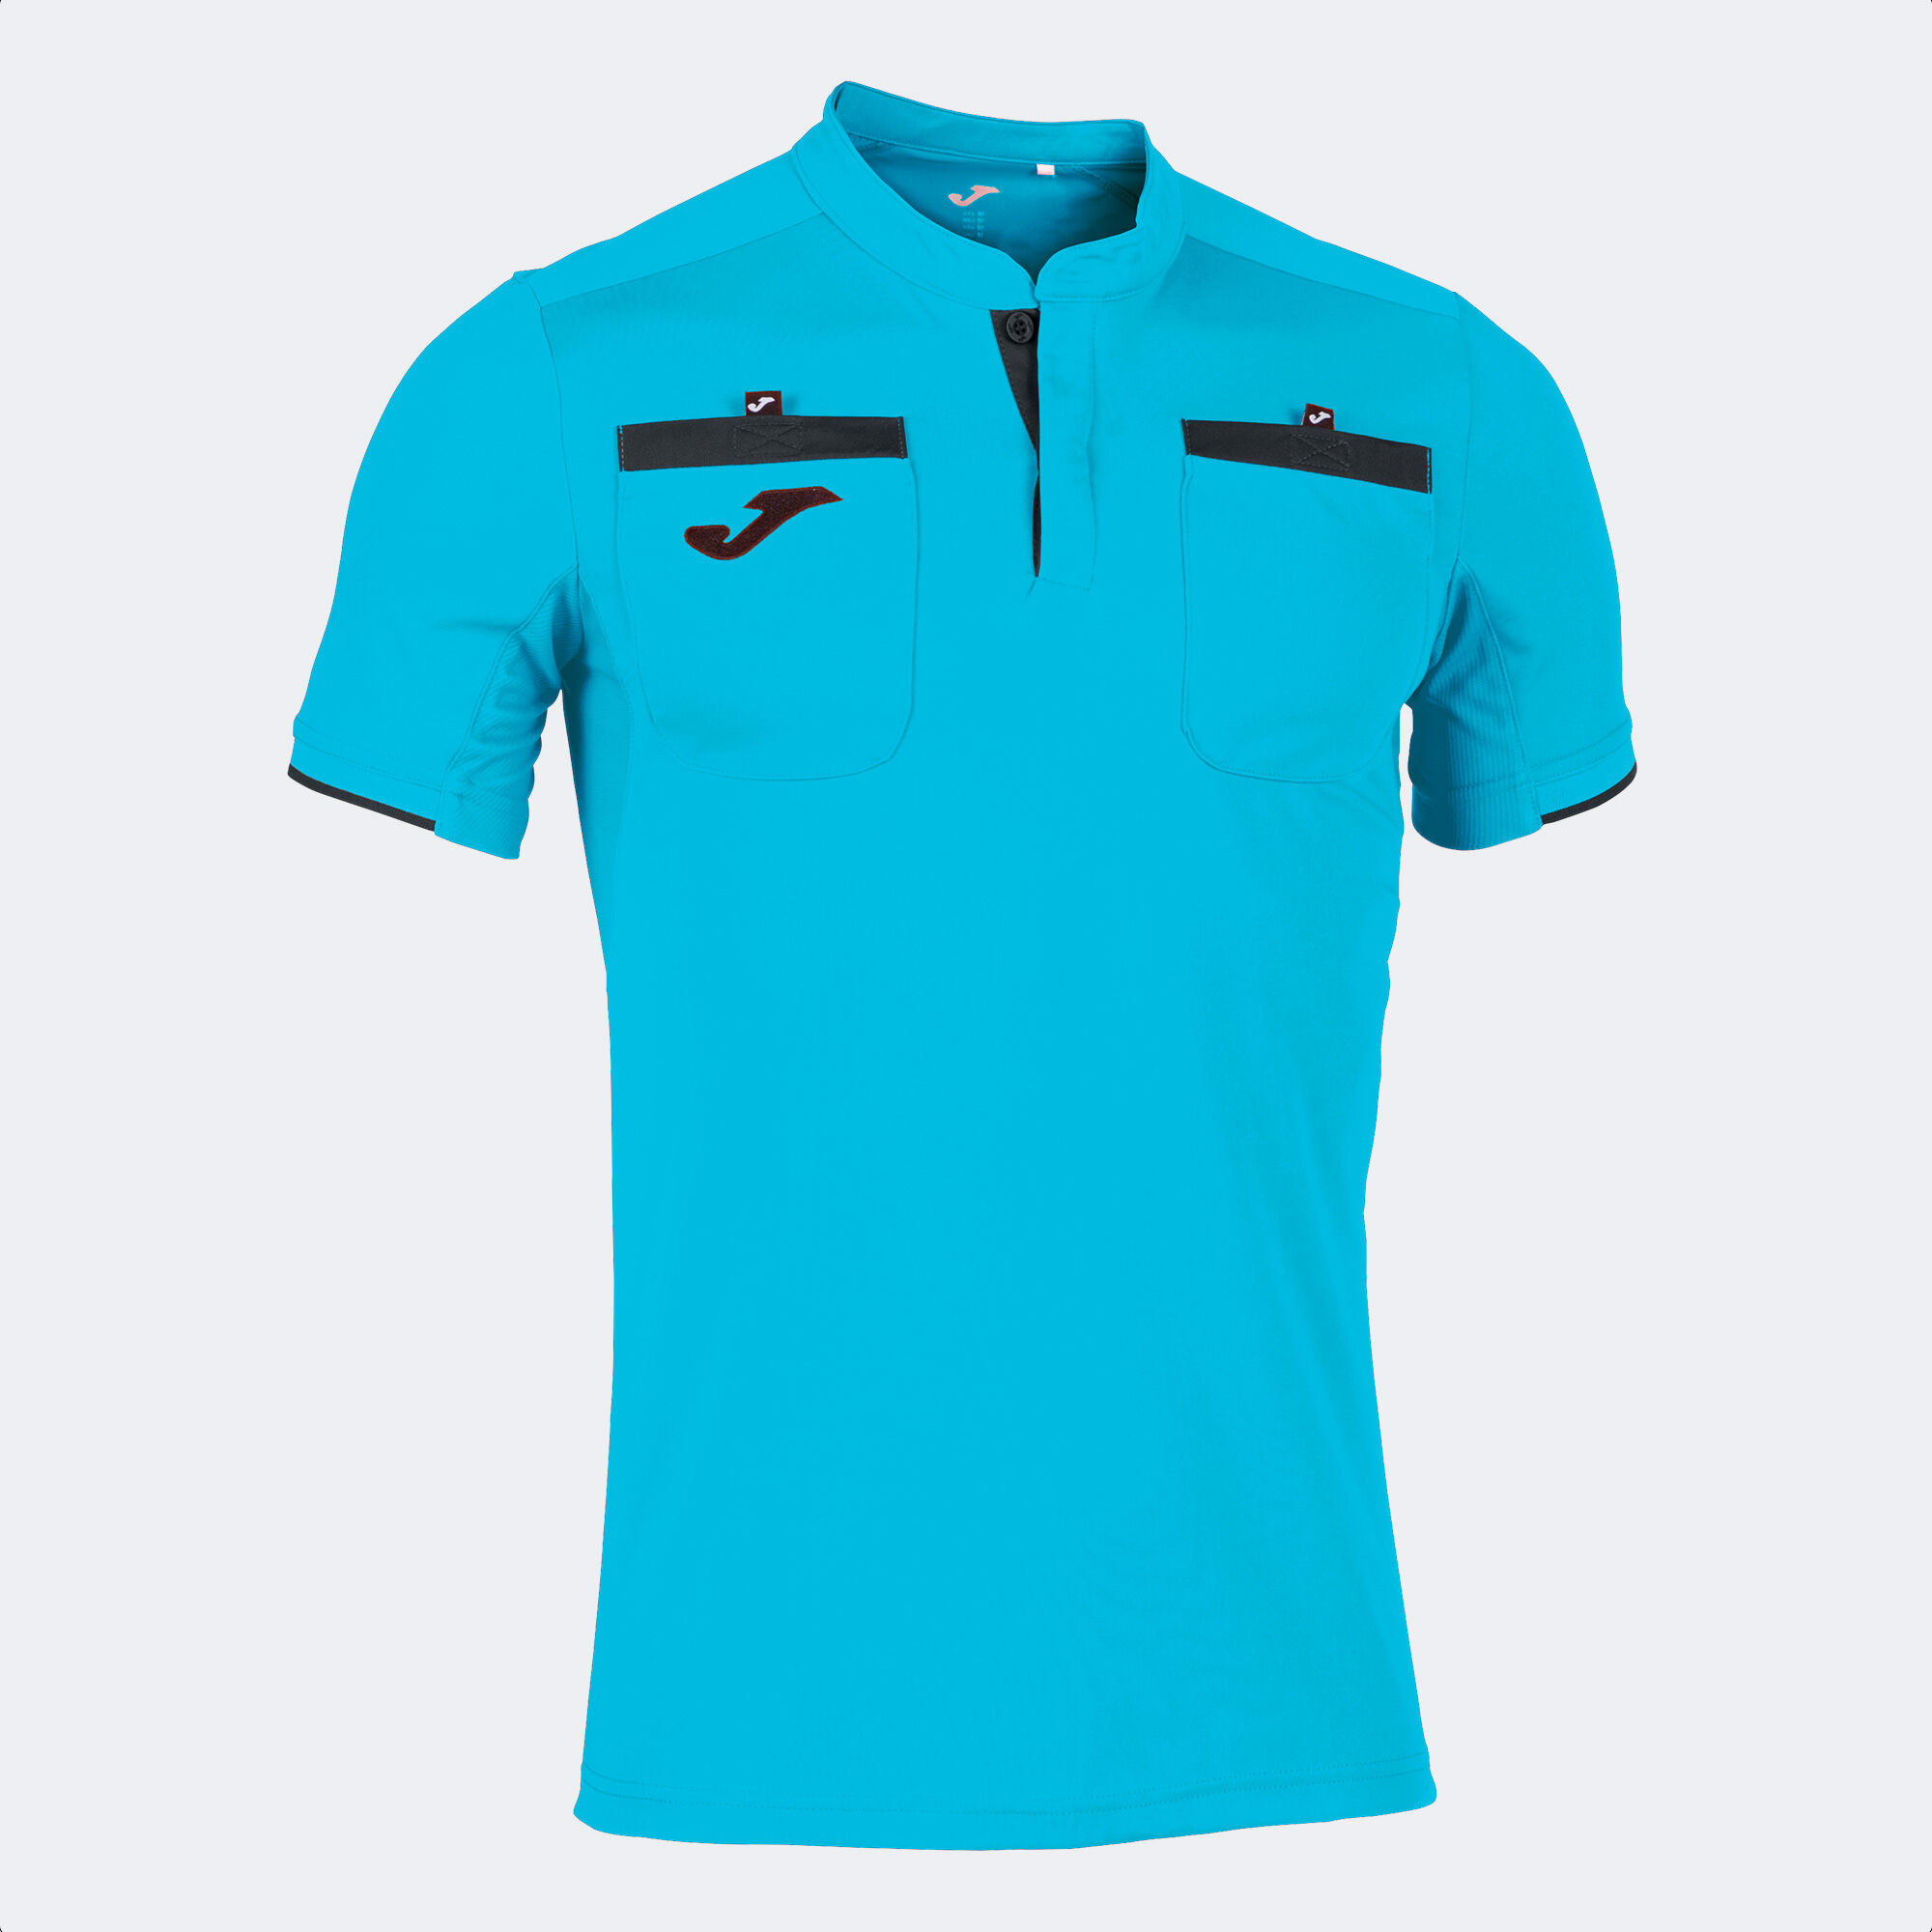 Maillot manches courtes homme Referee turquoise fluo